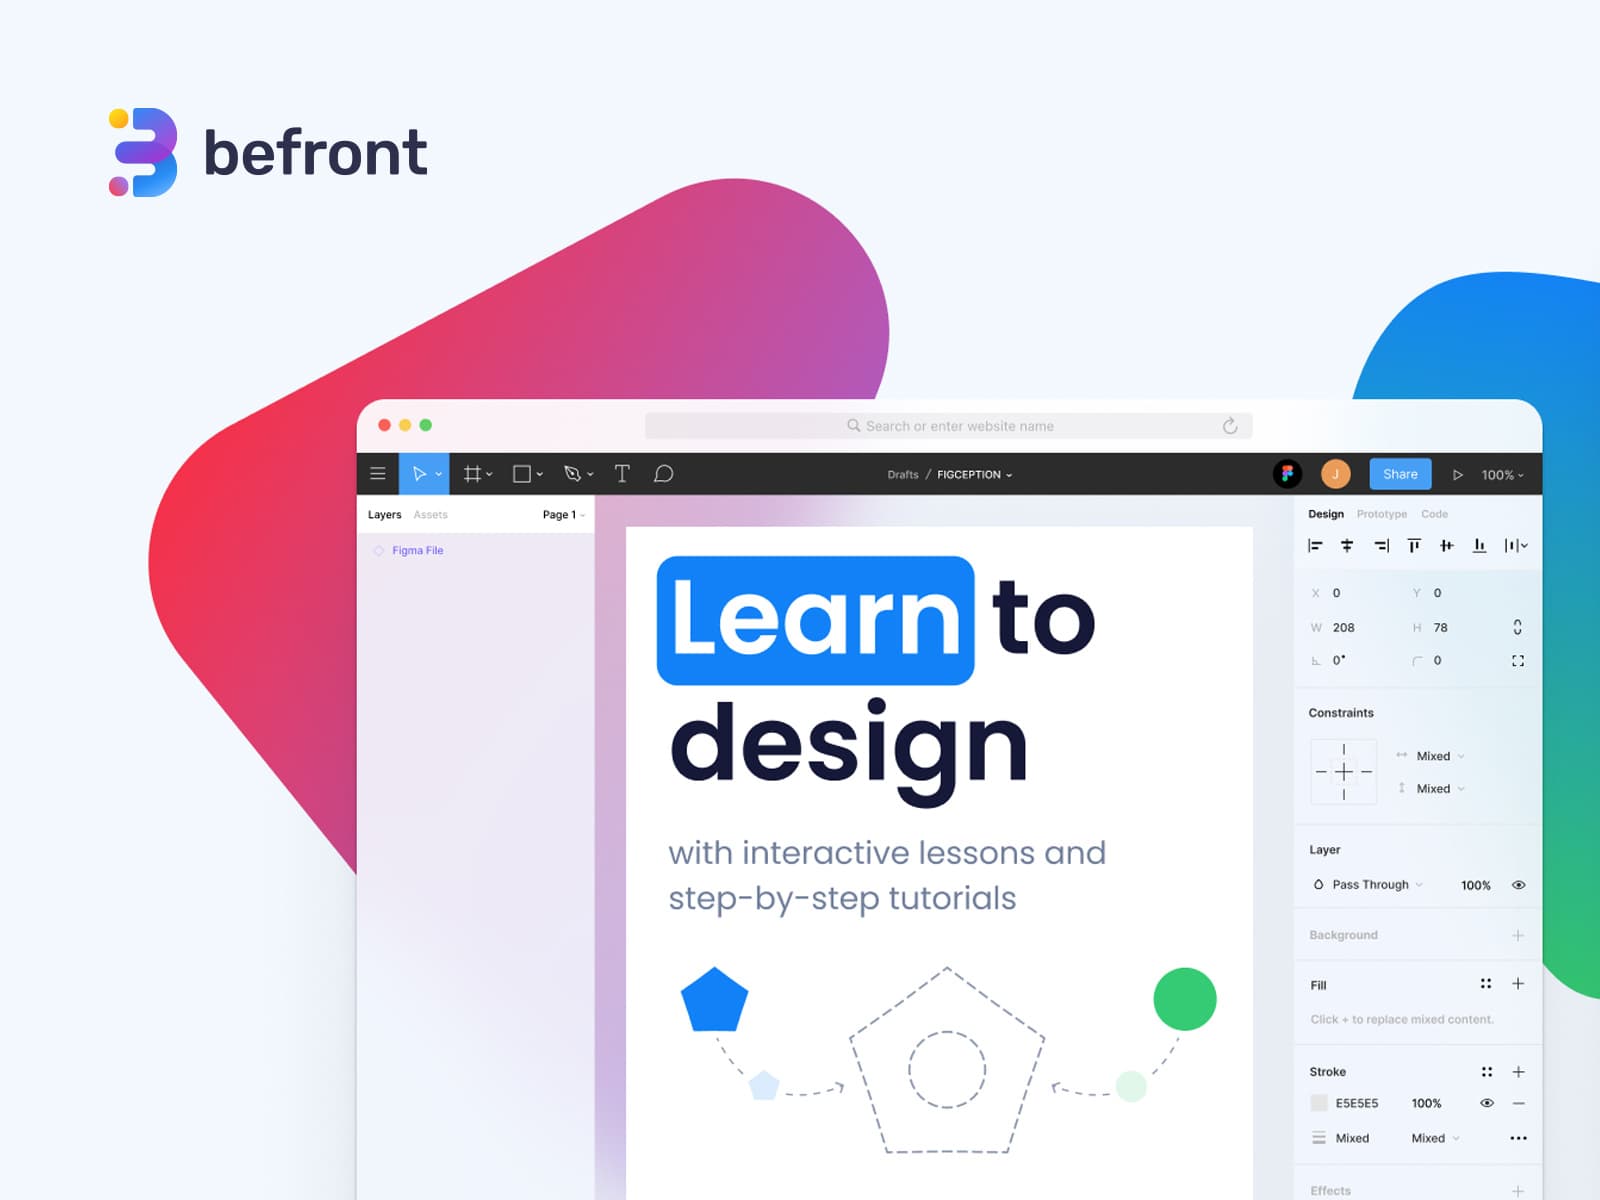 Befront - Learn design skills through practice